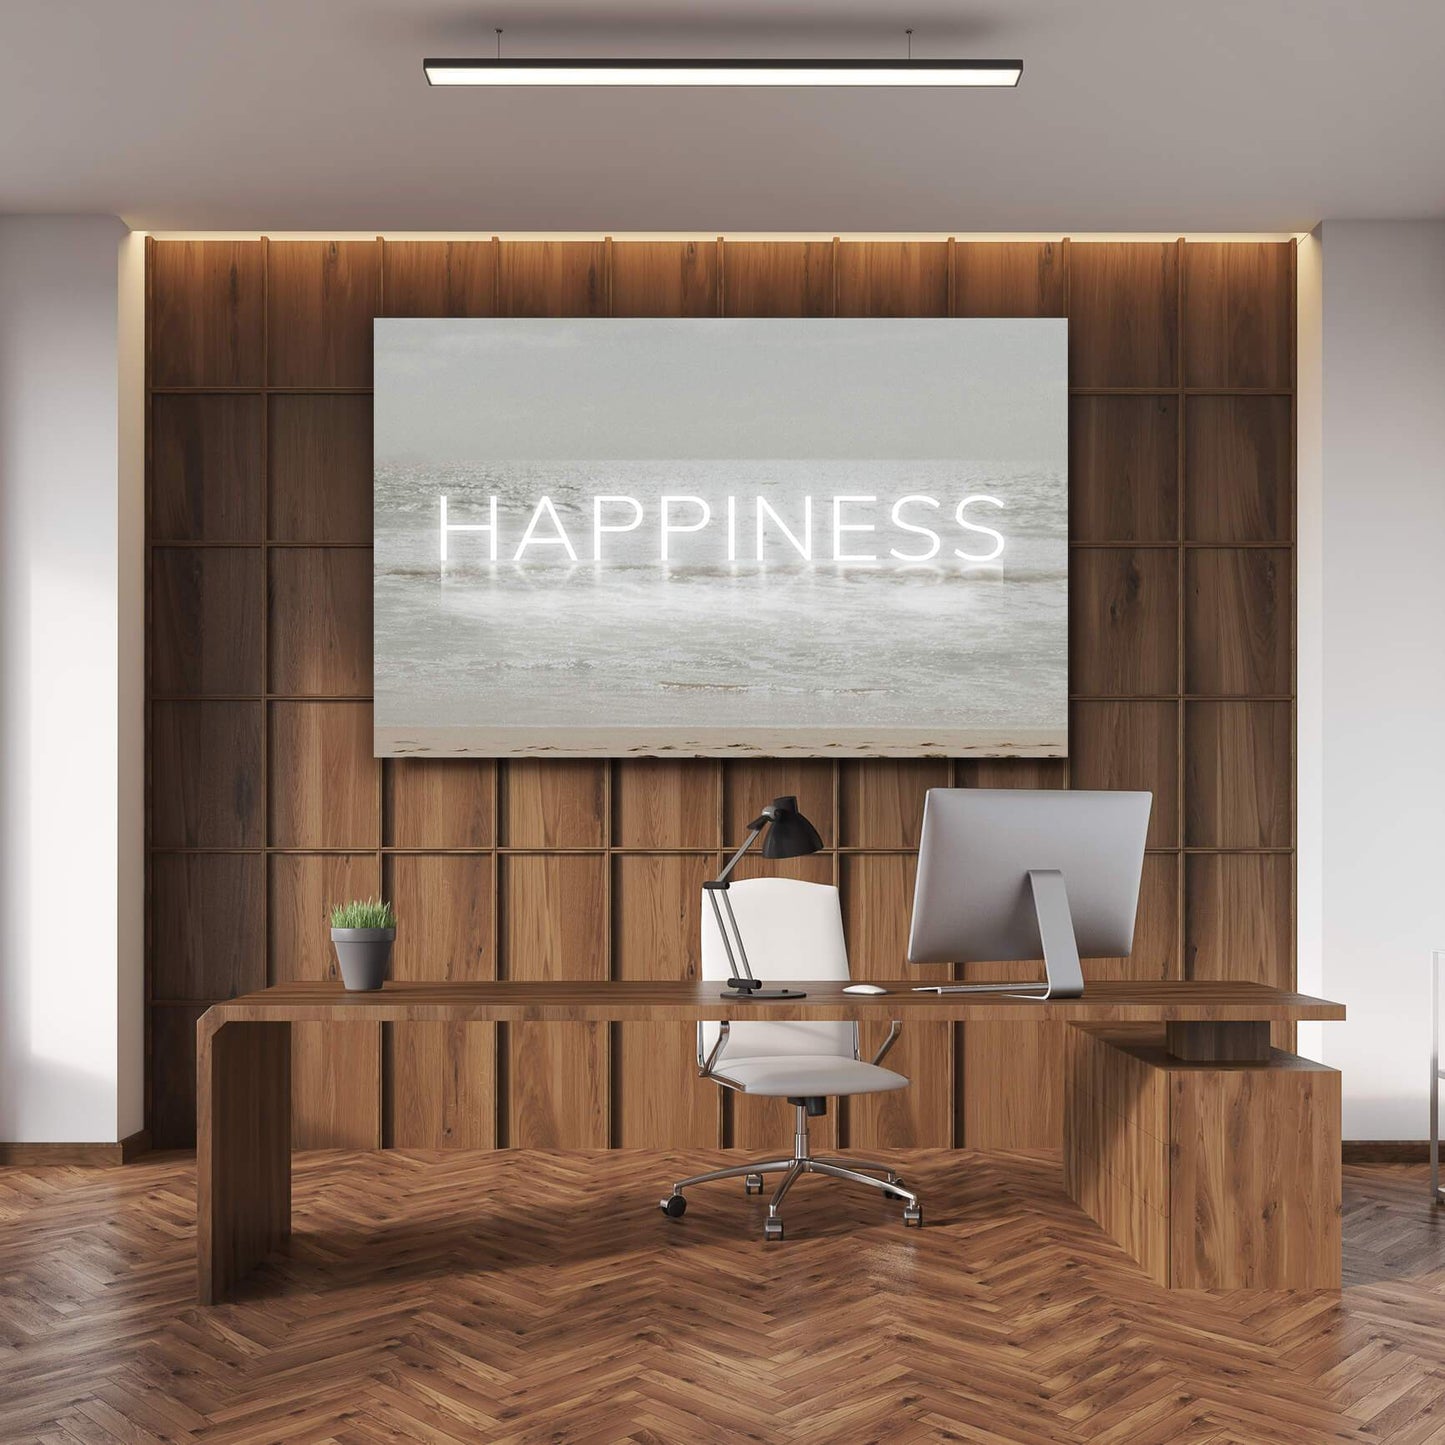 Neon Water - HAPPINESS Wall Art | Inspirational Wall Art Motivational Wall Art Quotes Office Art | ImpaktMaker Exclusive Canvas Art Landscape